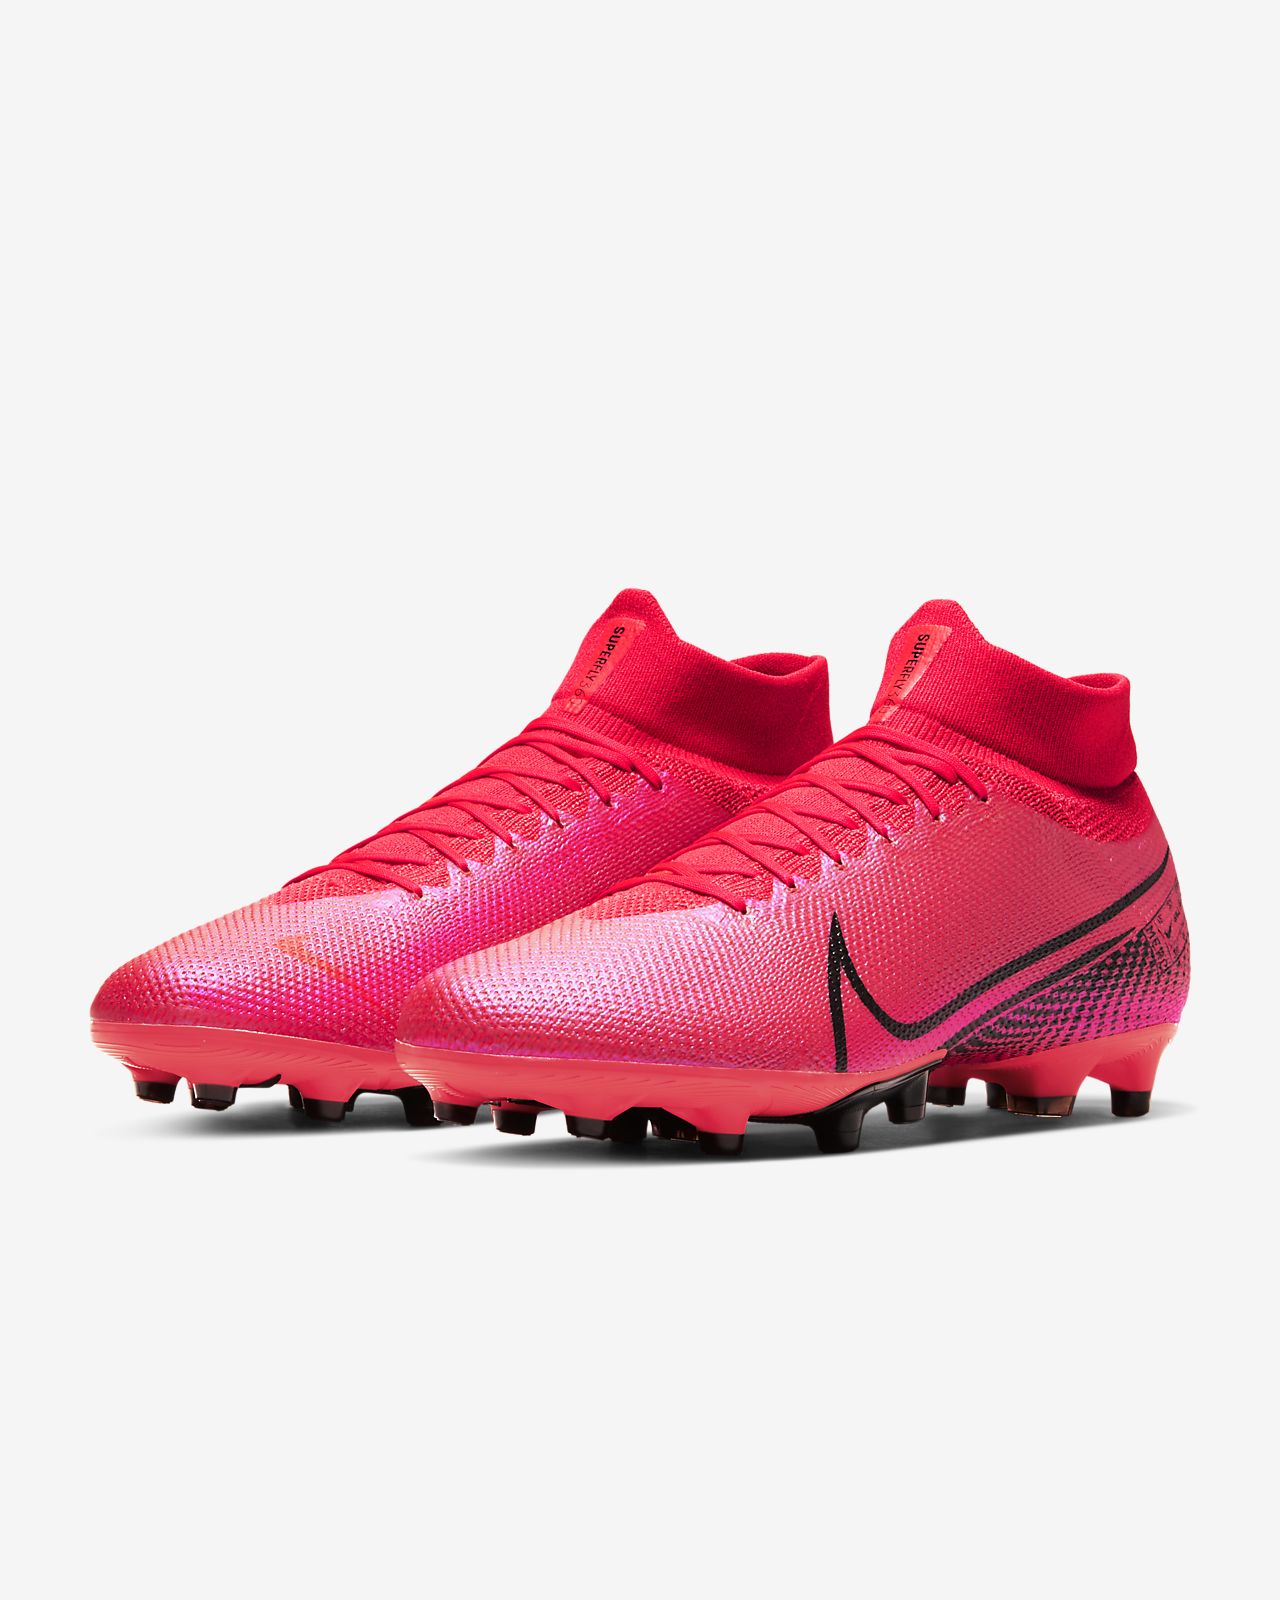 Nike Superfly 6 Pro CR7 LVL UP FG Football Shoes Men pure.